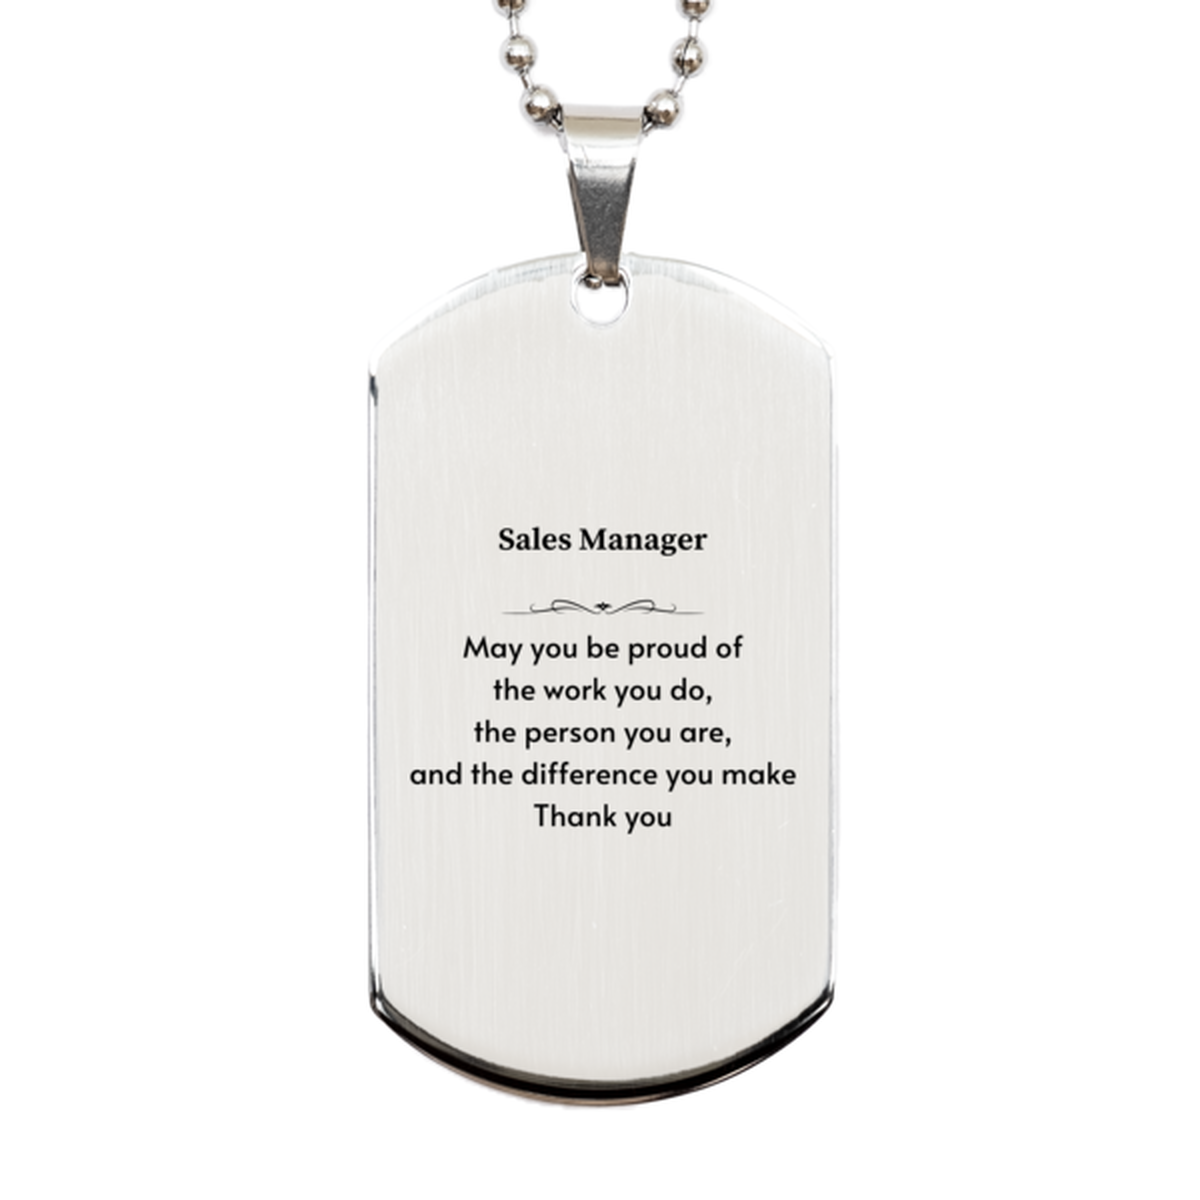 Heartwarming Silver Dog Tag Retirement Coworkers Gifts for Sales Manager, Sales Manager May You be proud of the work you do, the person you are Gifts for Boss Men Women Friends